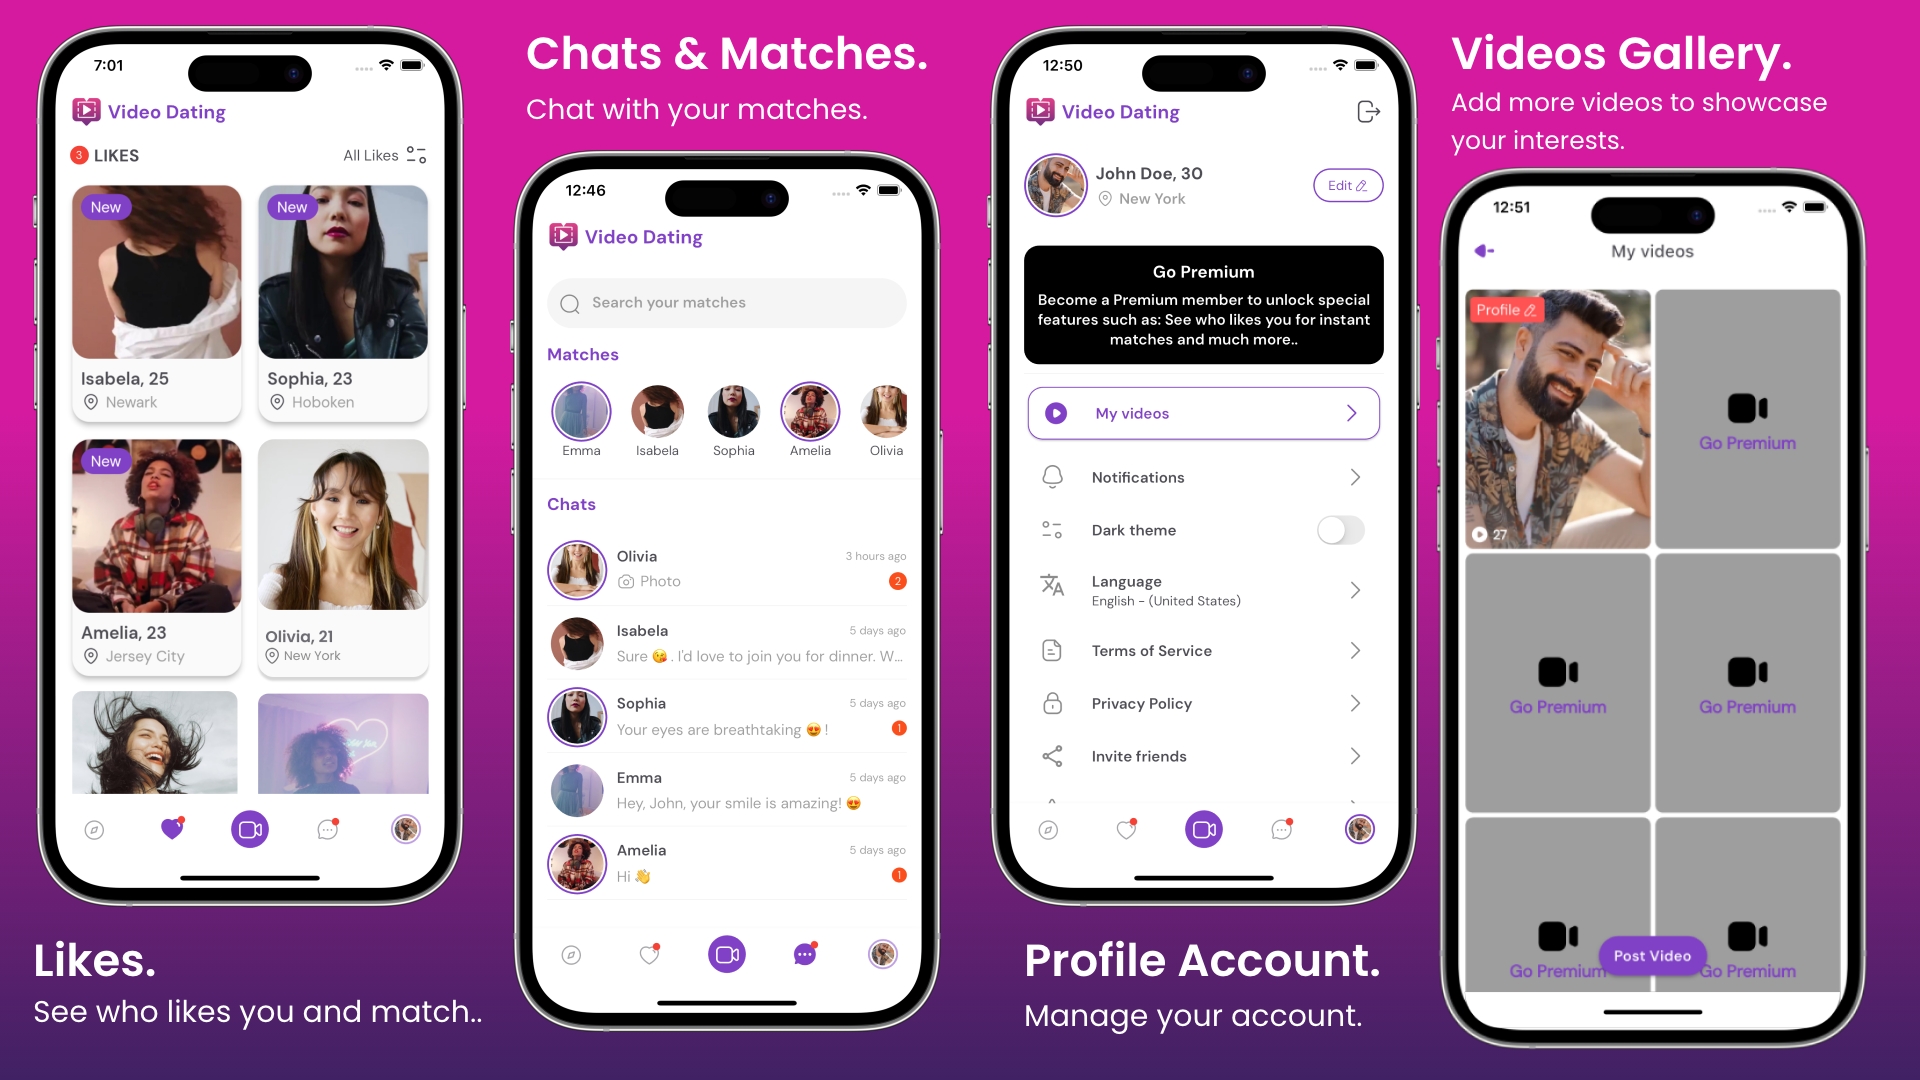 Likes, Chats & Matches, Profile Account and Videos Gallery screens